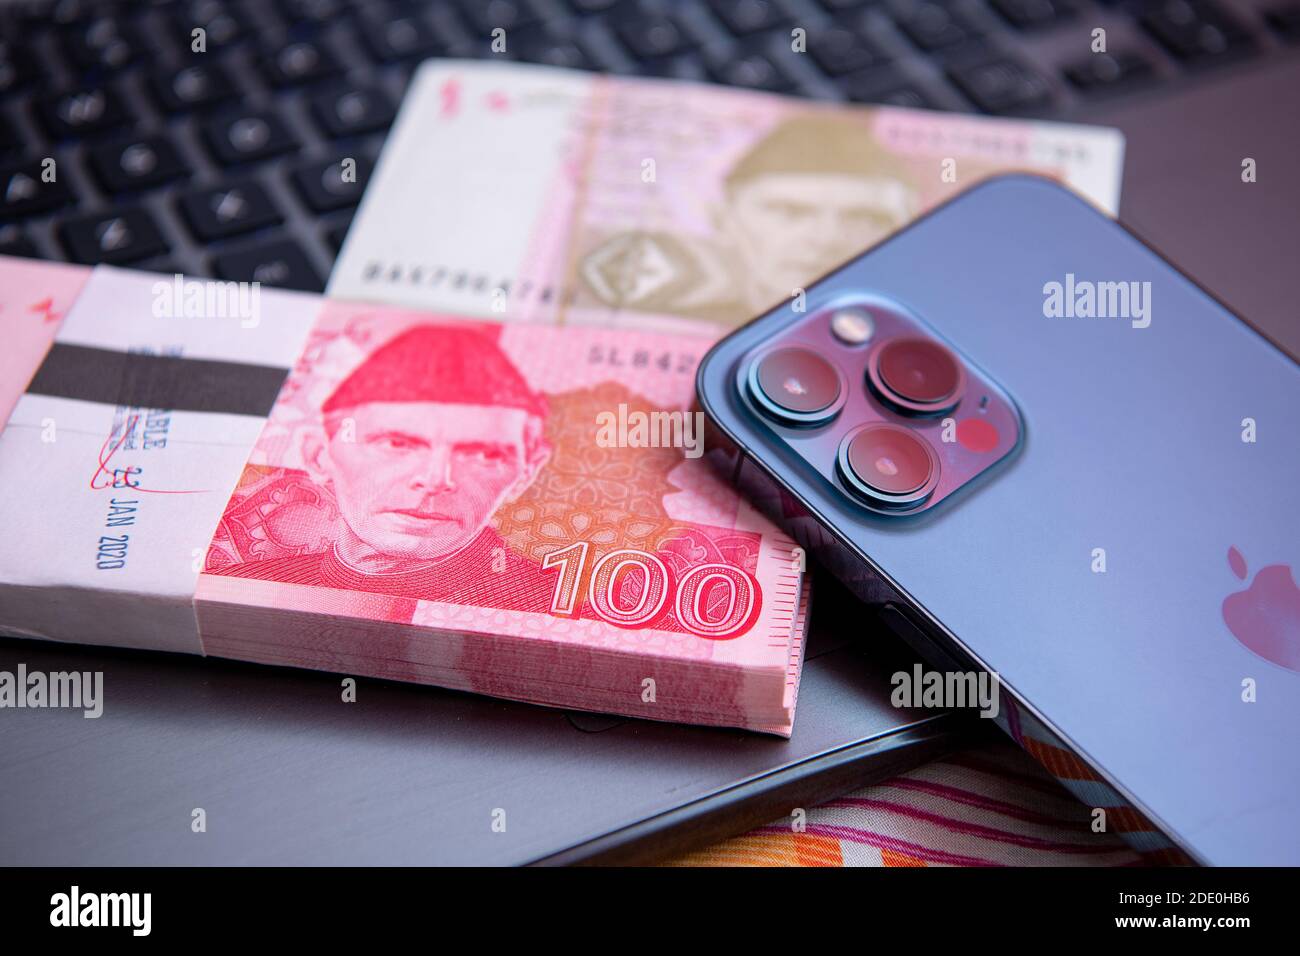 Pakistani Currency 100 rupees Banknote with iphone 12 pro max . Business and Finance concept Stock Photo